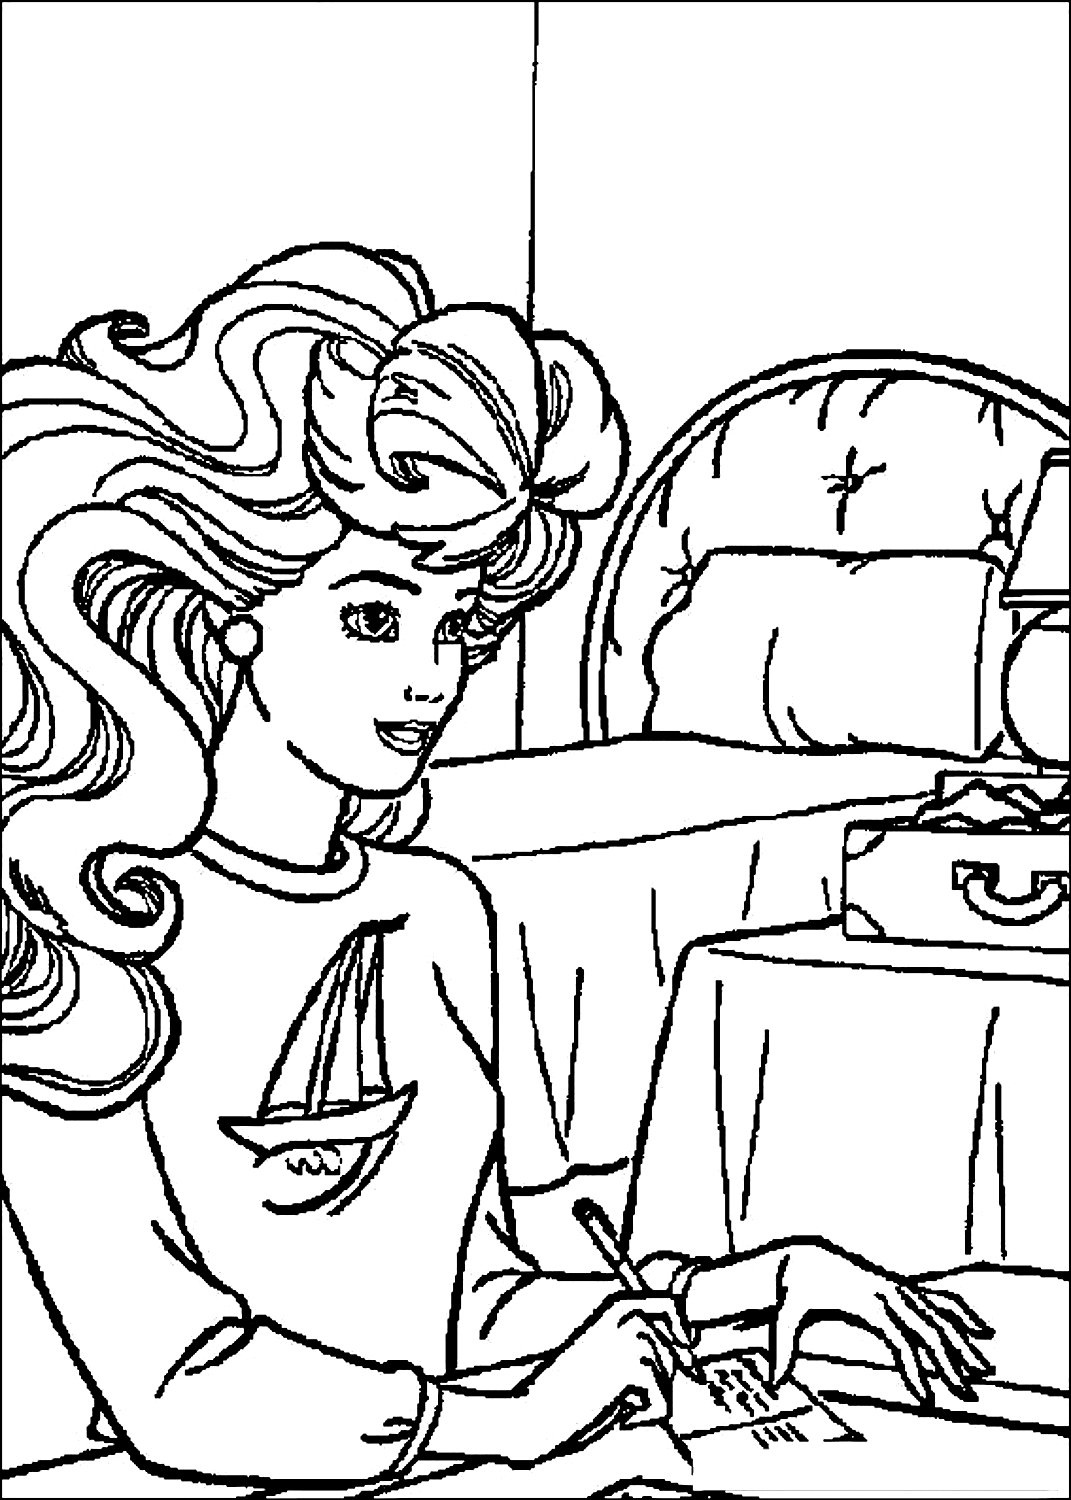 Barbie 21  coloring page to print and coloring